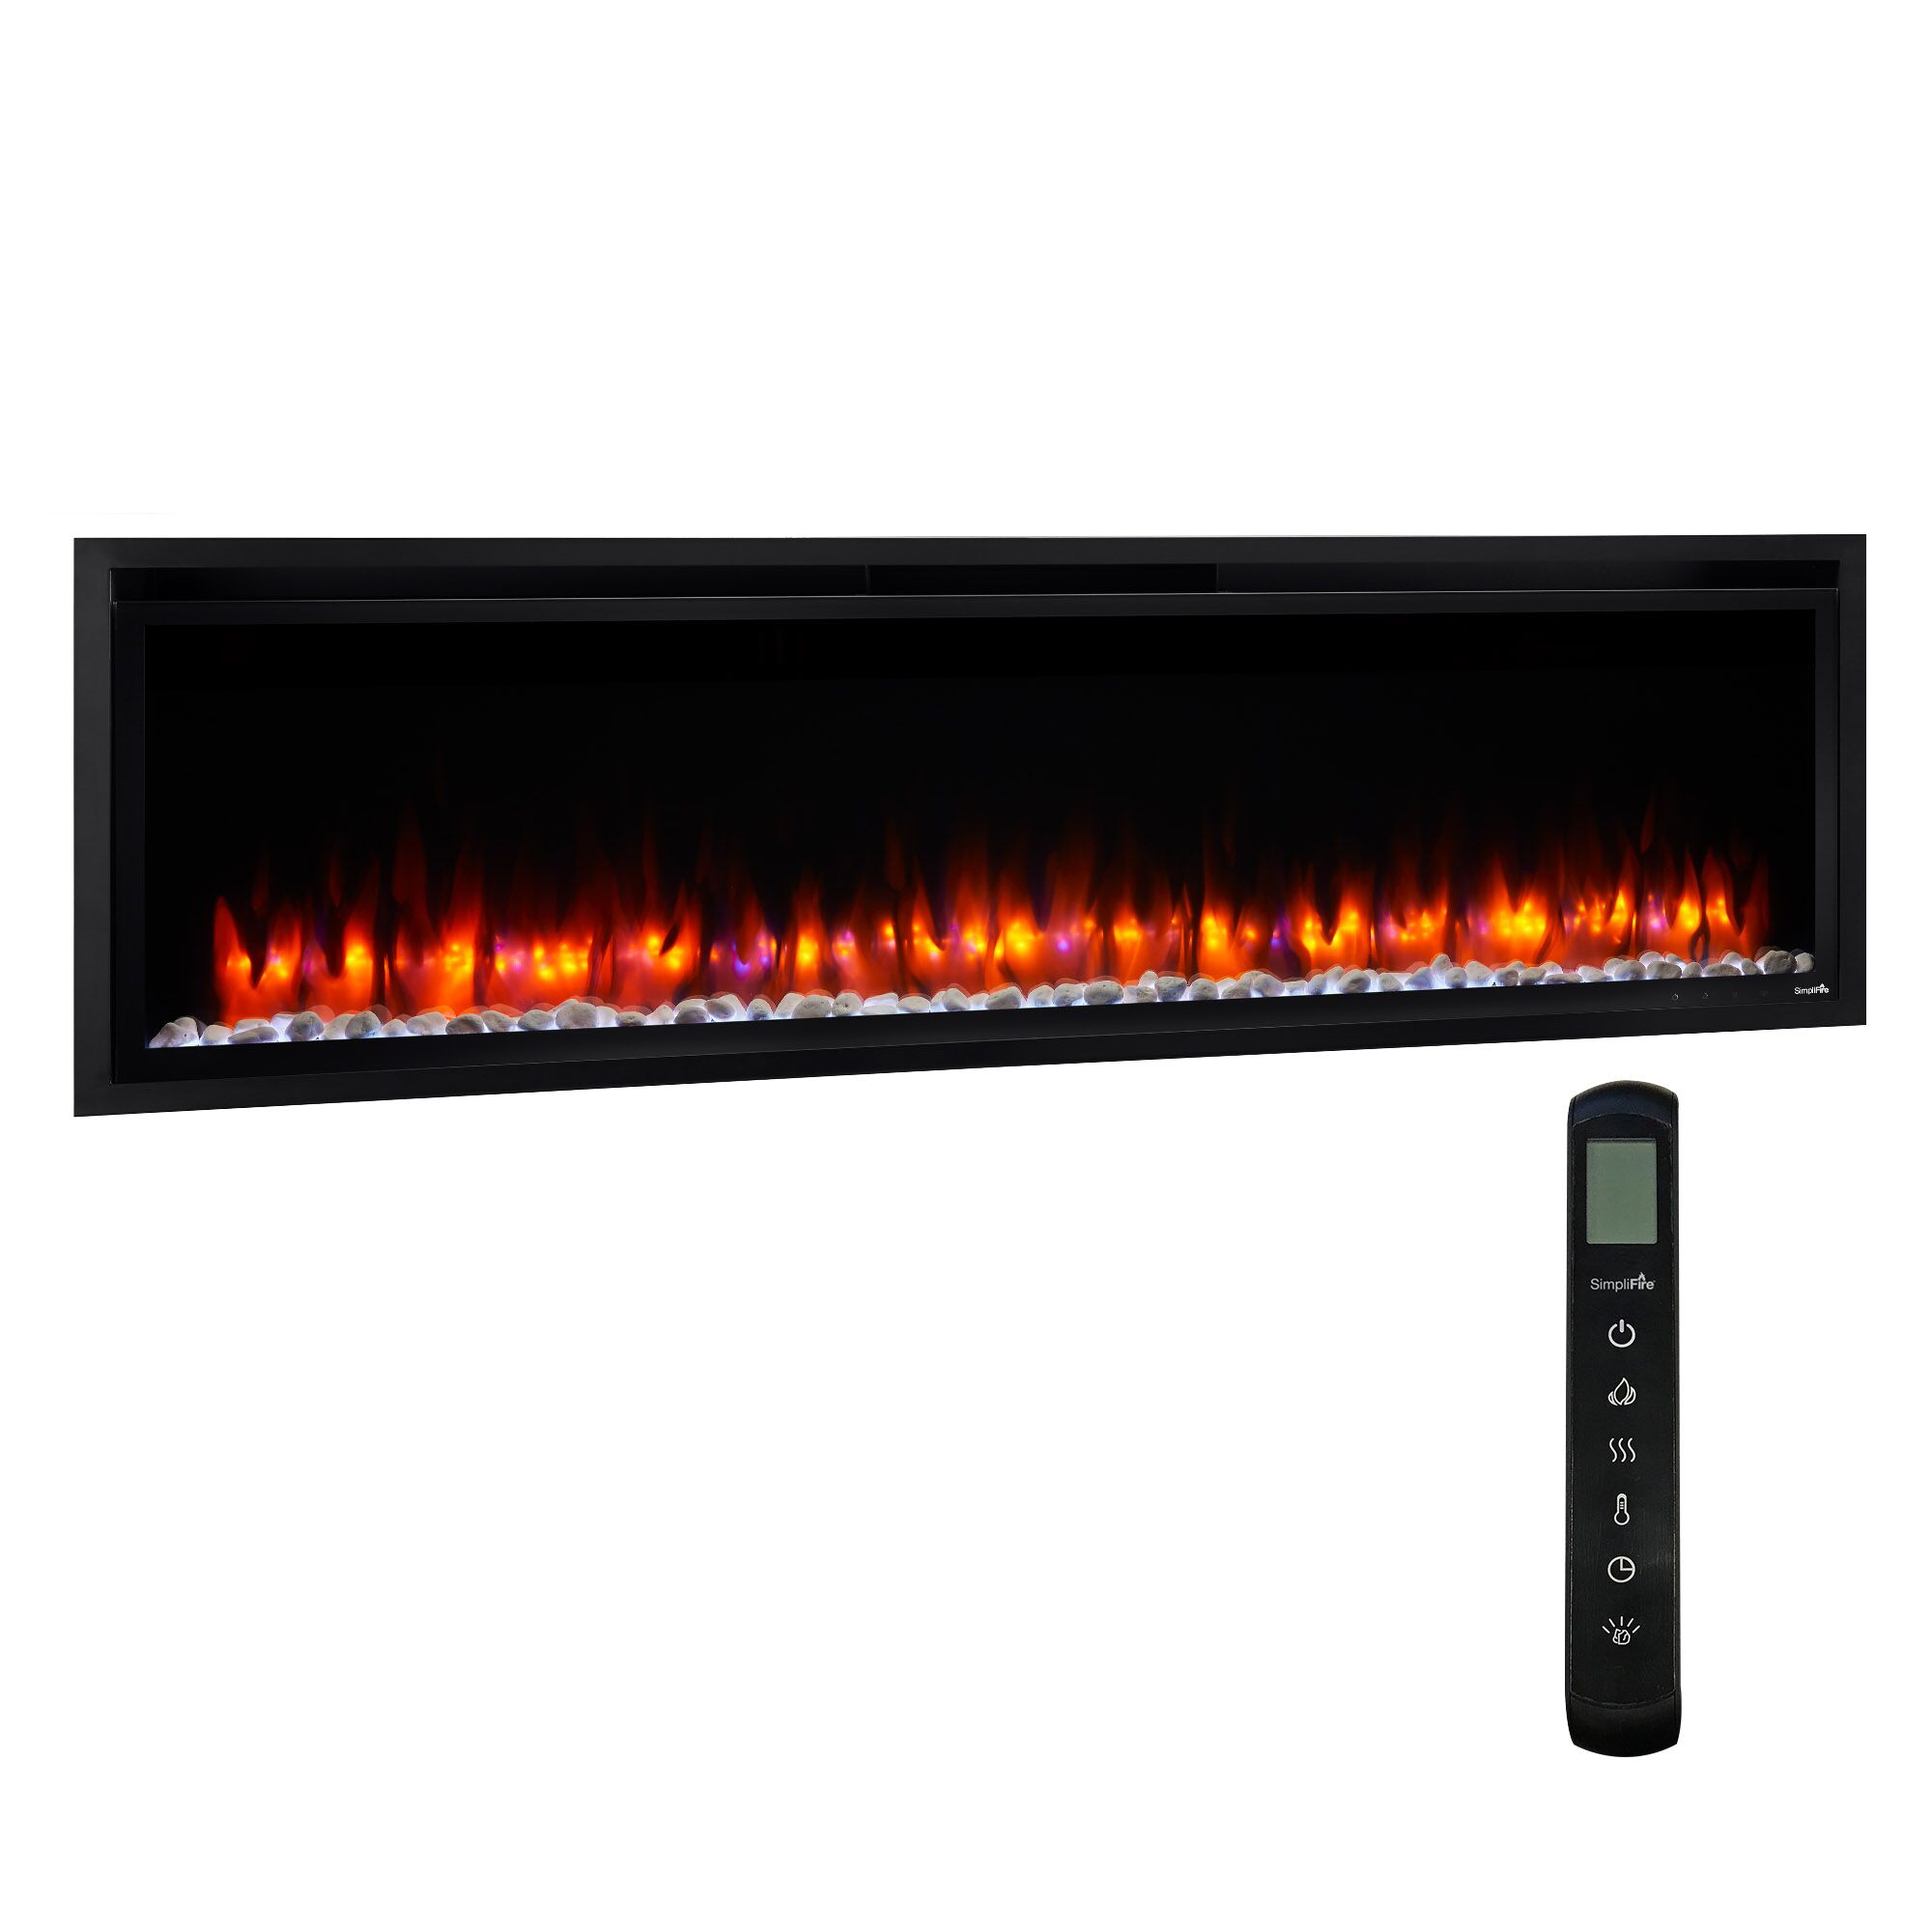 60 inch allusion platinum electric fireplace product image